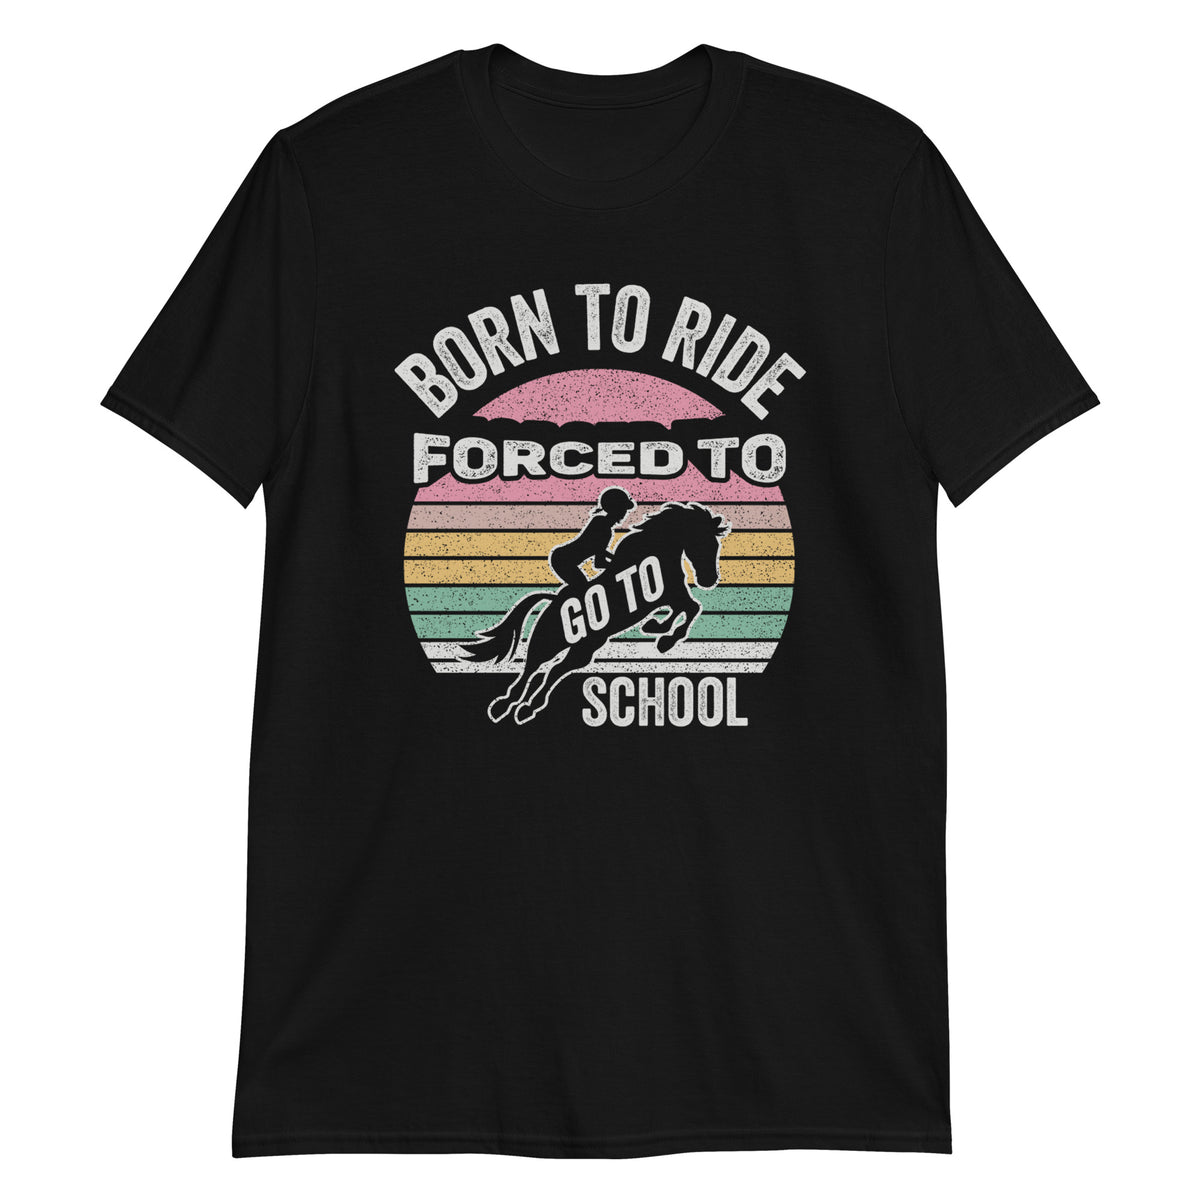 Born to Ride Forced to Go to School T-Shirt